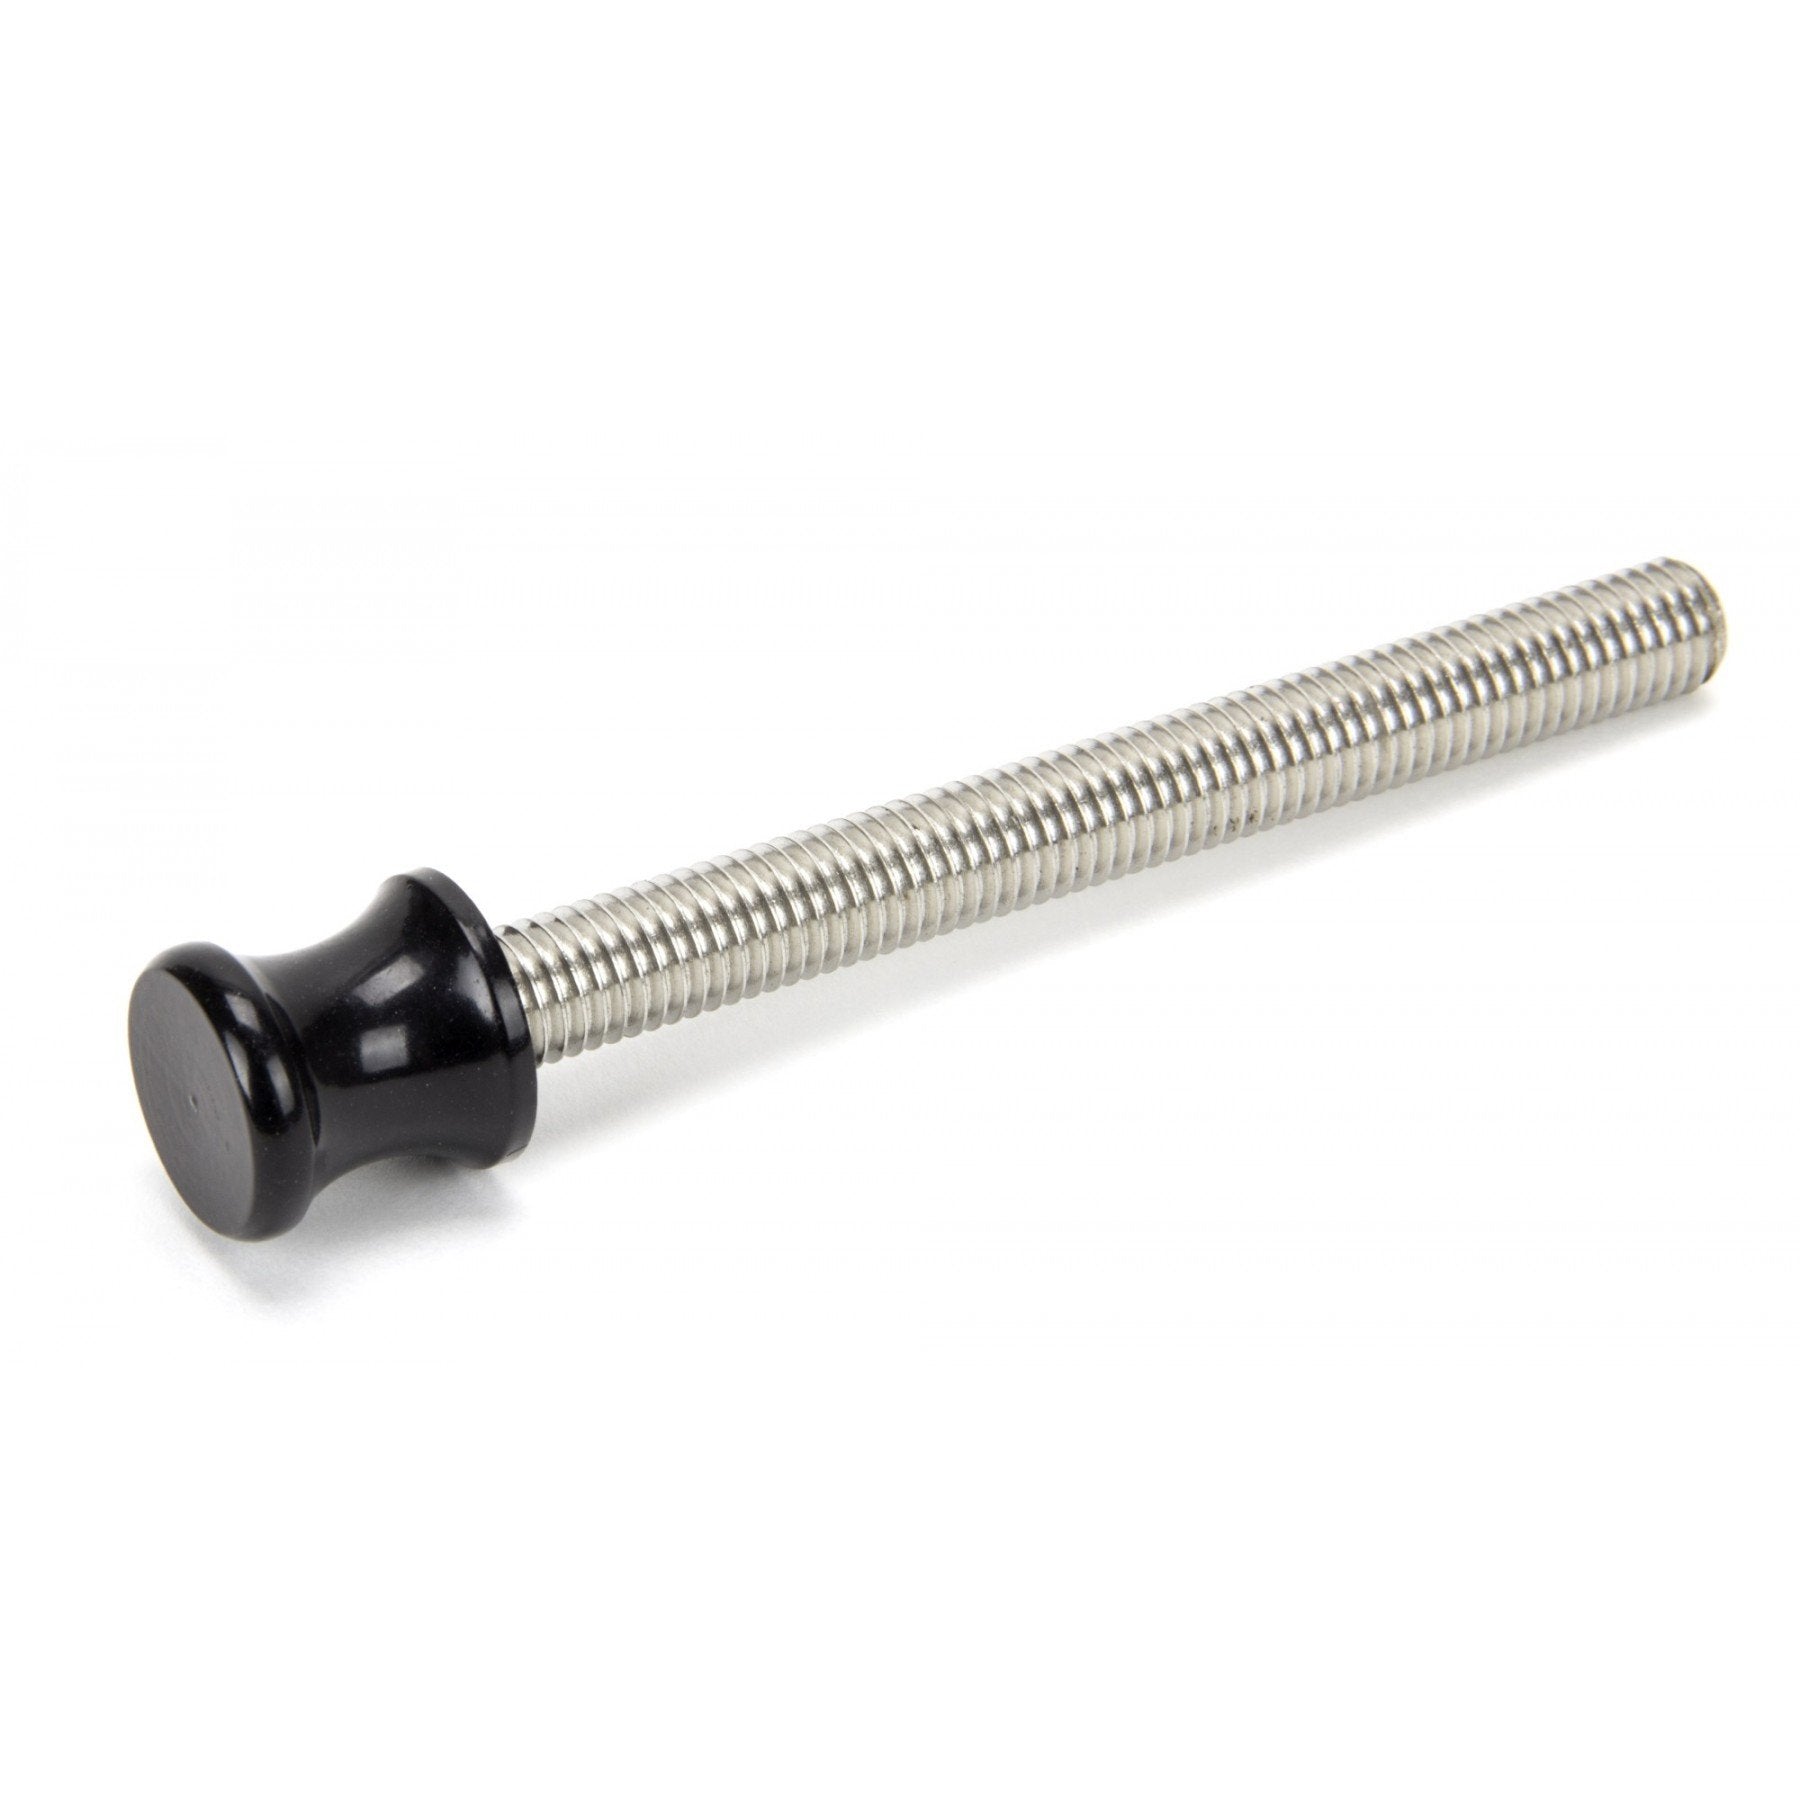 From the Anvil Black ended SS M10 110mm Threaded Bar - No.42 Interiors